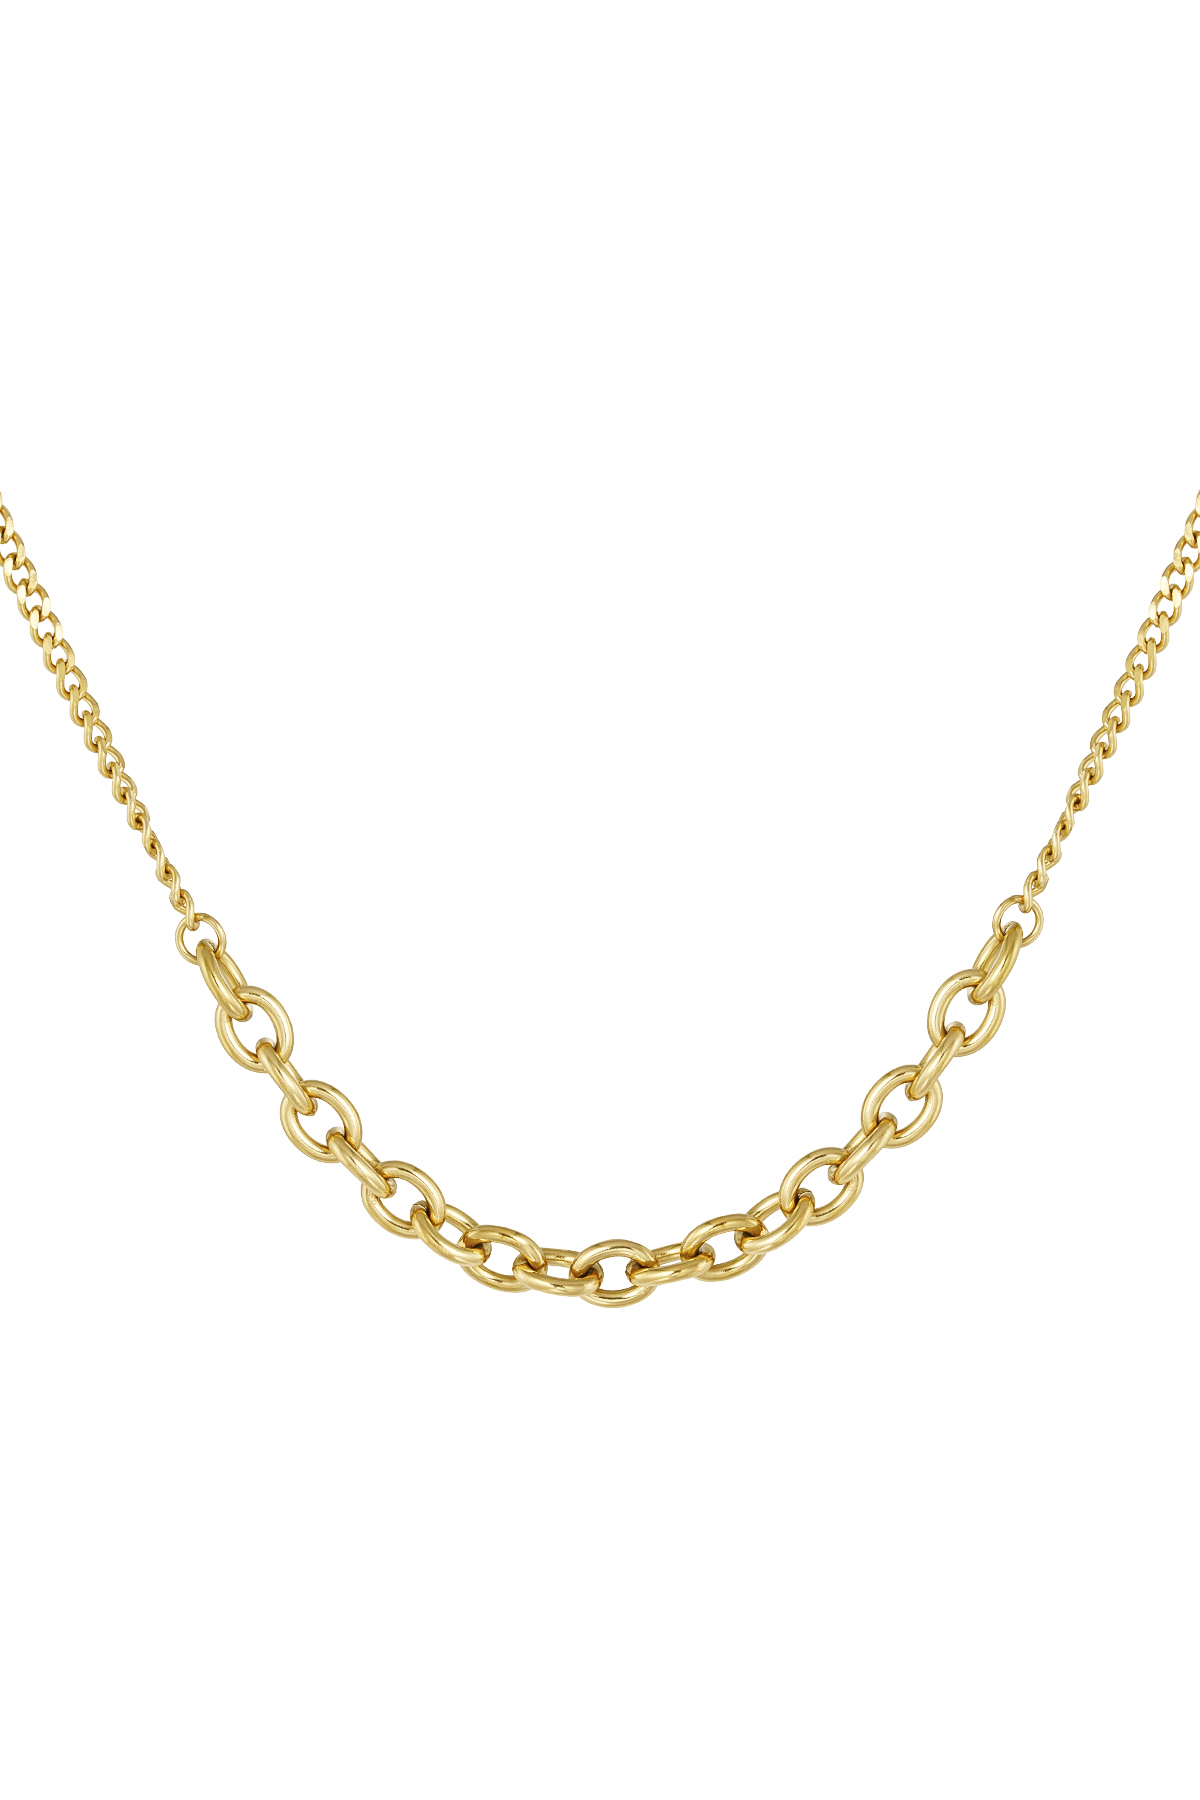 Link chain 2 sizes - gold